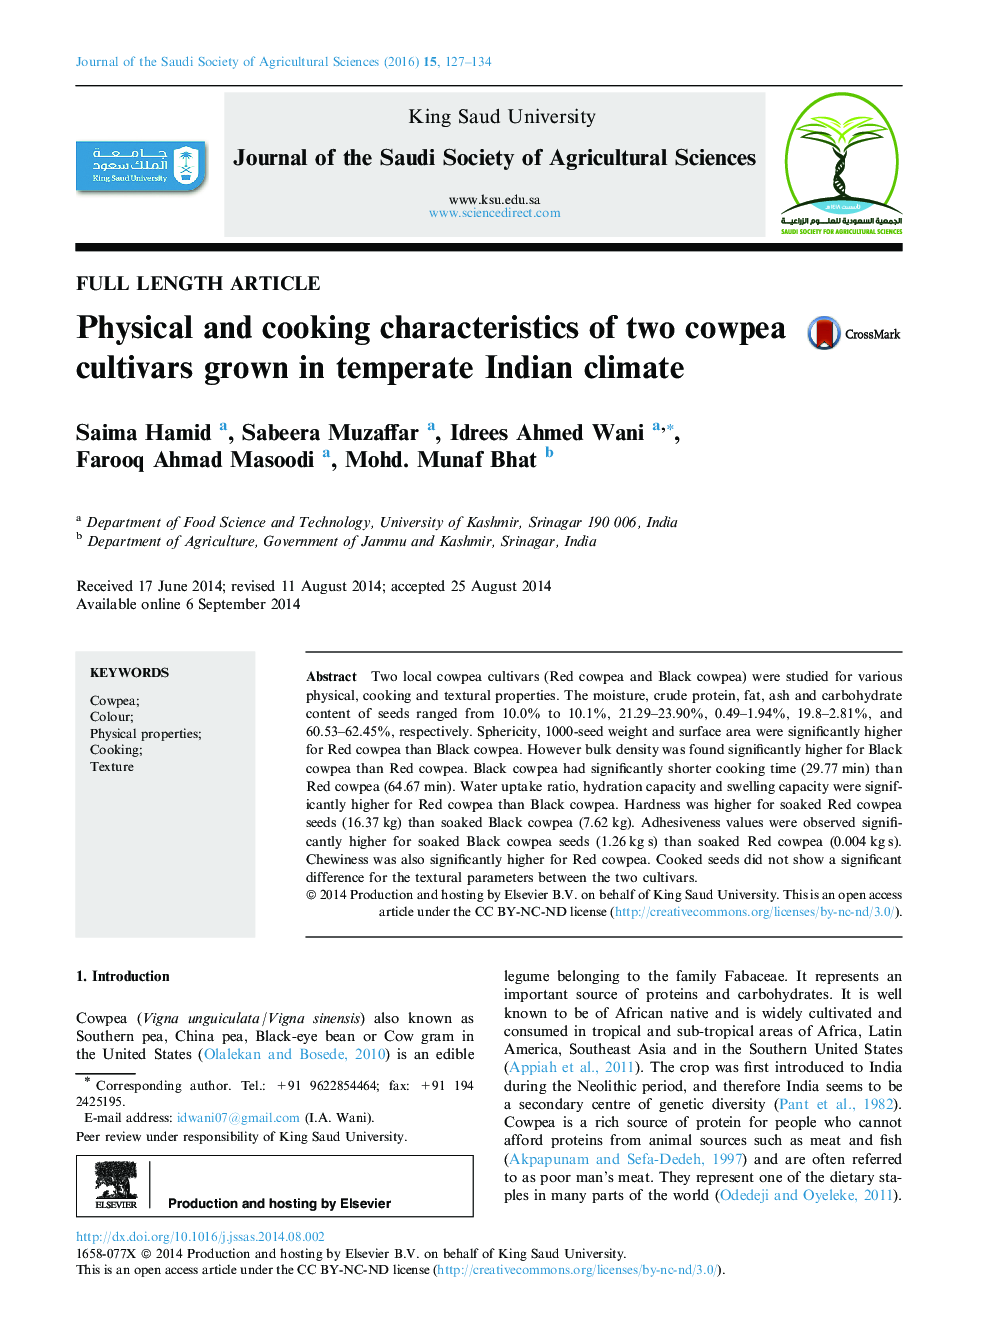 Physical and cooking characteristics of two cowpea cultivars grown in temperate Indian climate 